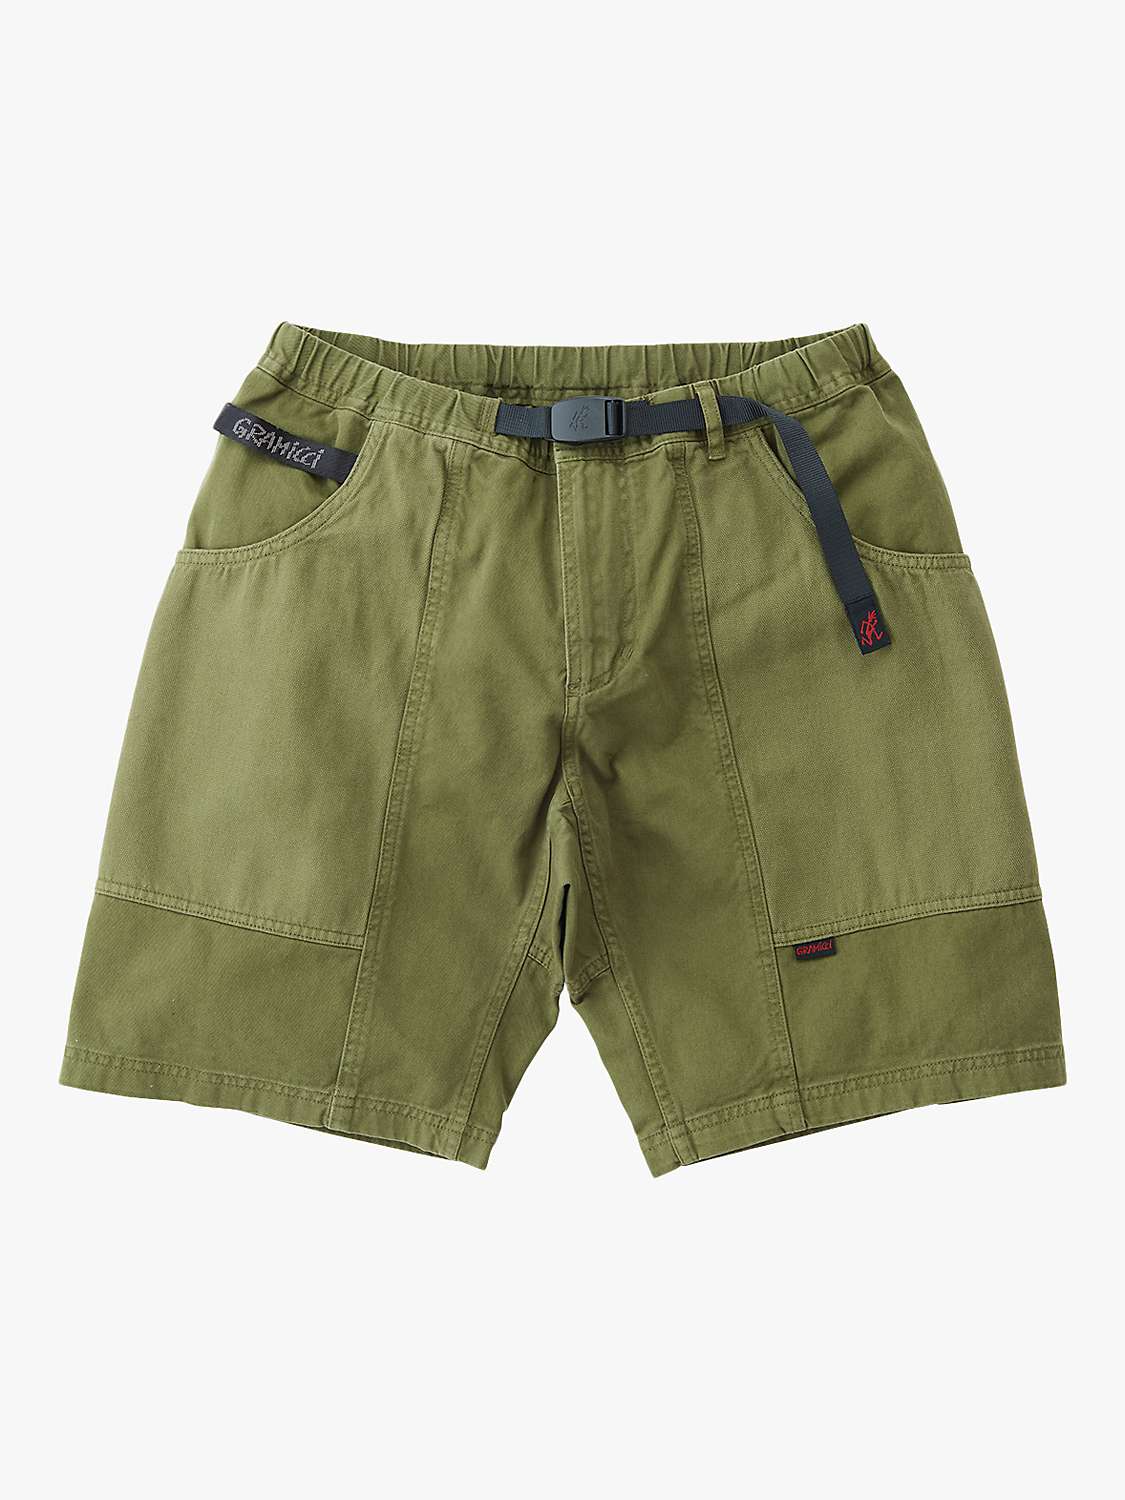 Buy Gramicci Gadget Organic Cotton Relaxed Fit Shorts, Olive Online at johnlewis.com